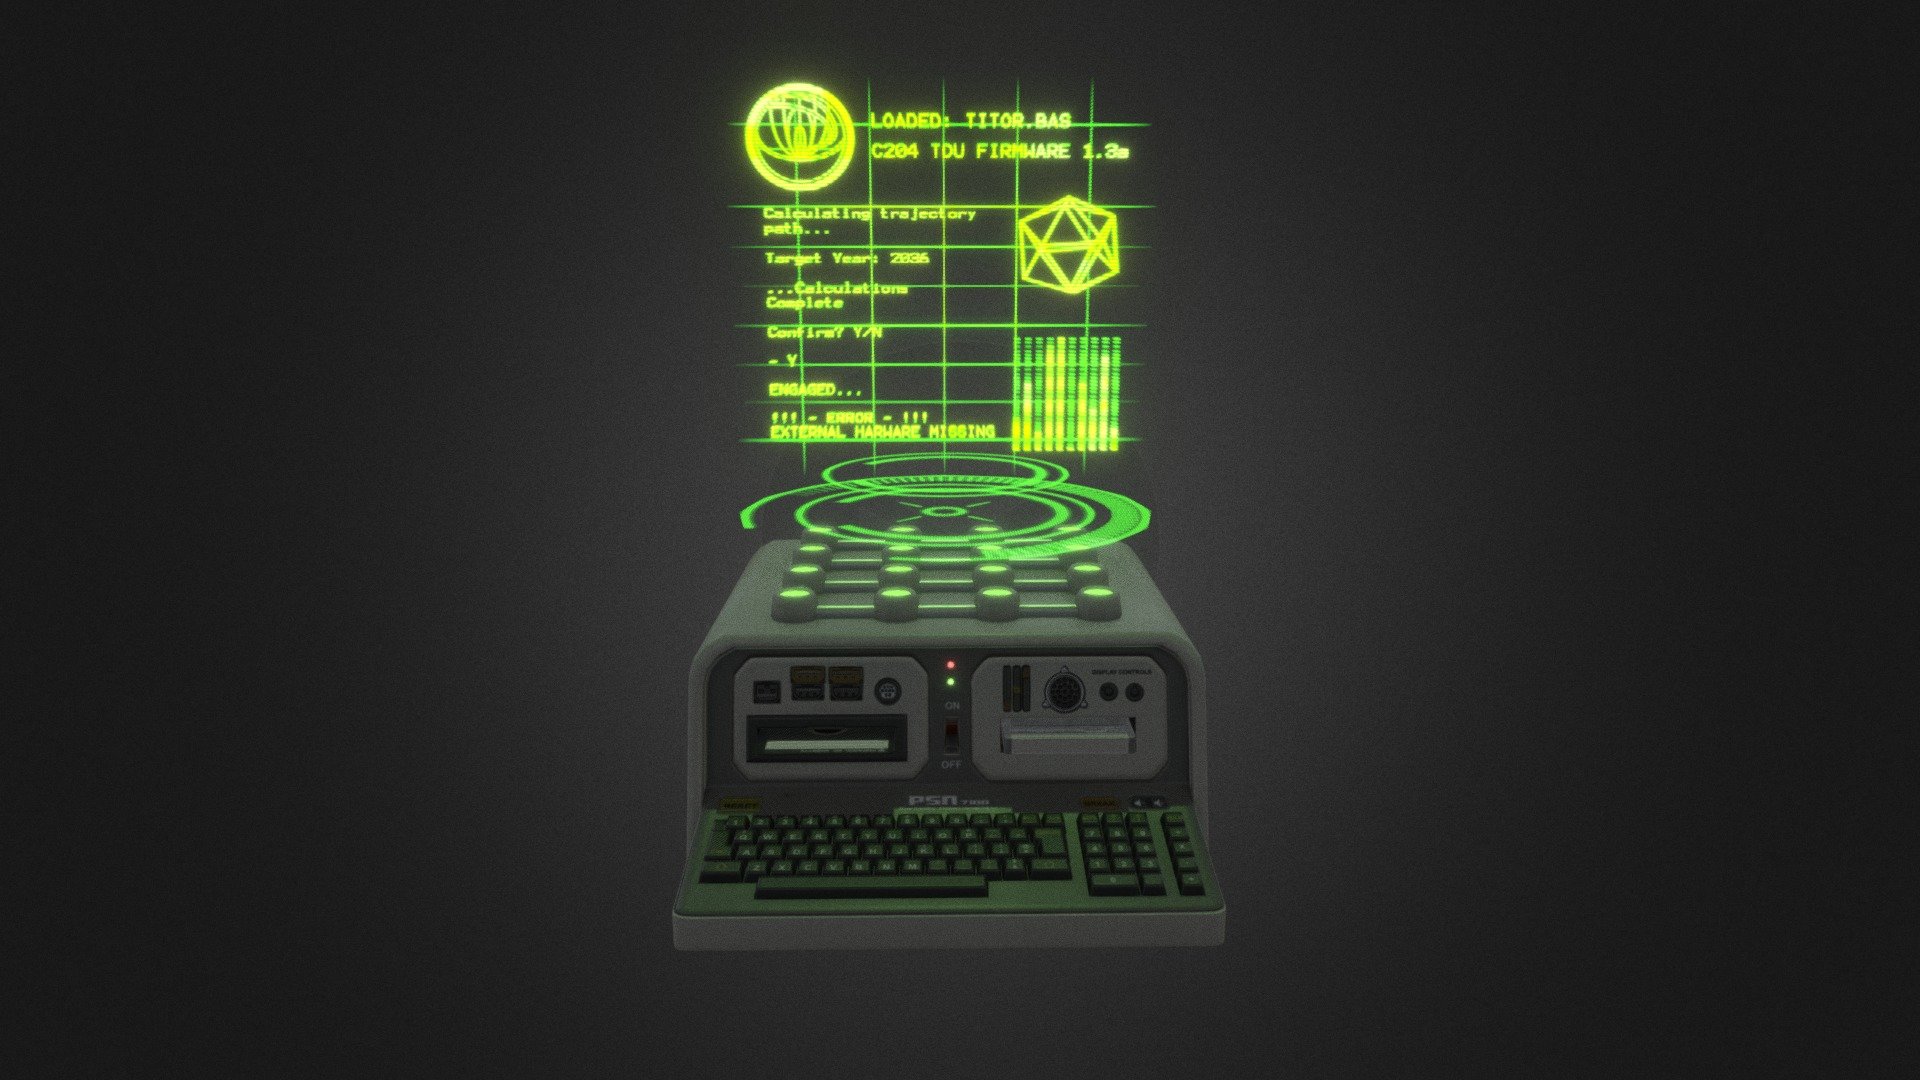 A sci-fi holographic computer I made that is loosely based off the IBM 5100. Originally created for Second Life, shown here in Metalness PBR. Textured in Quixel Suite and Photoshop, modeled in Blender with the HardOps plugin.

The hologram is static for now, it normally has an animation (in other engines) but I am still trying to figure out a good way to have both a smooth interpolated rotation of the rings on the bottom and a hard transition of frames on the main screen (only way I can currently think of is to use the frame-by-frame method here but that would require way too much mesh data for smooth rotation). I may upload an animated version later 3d model